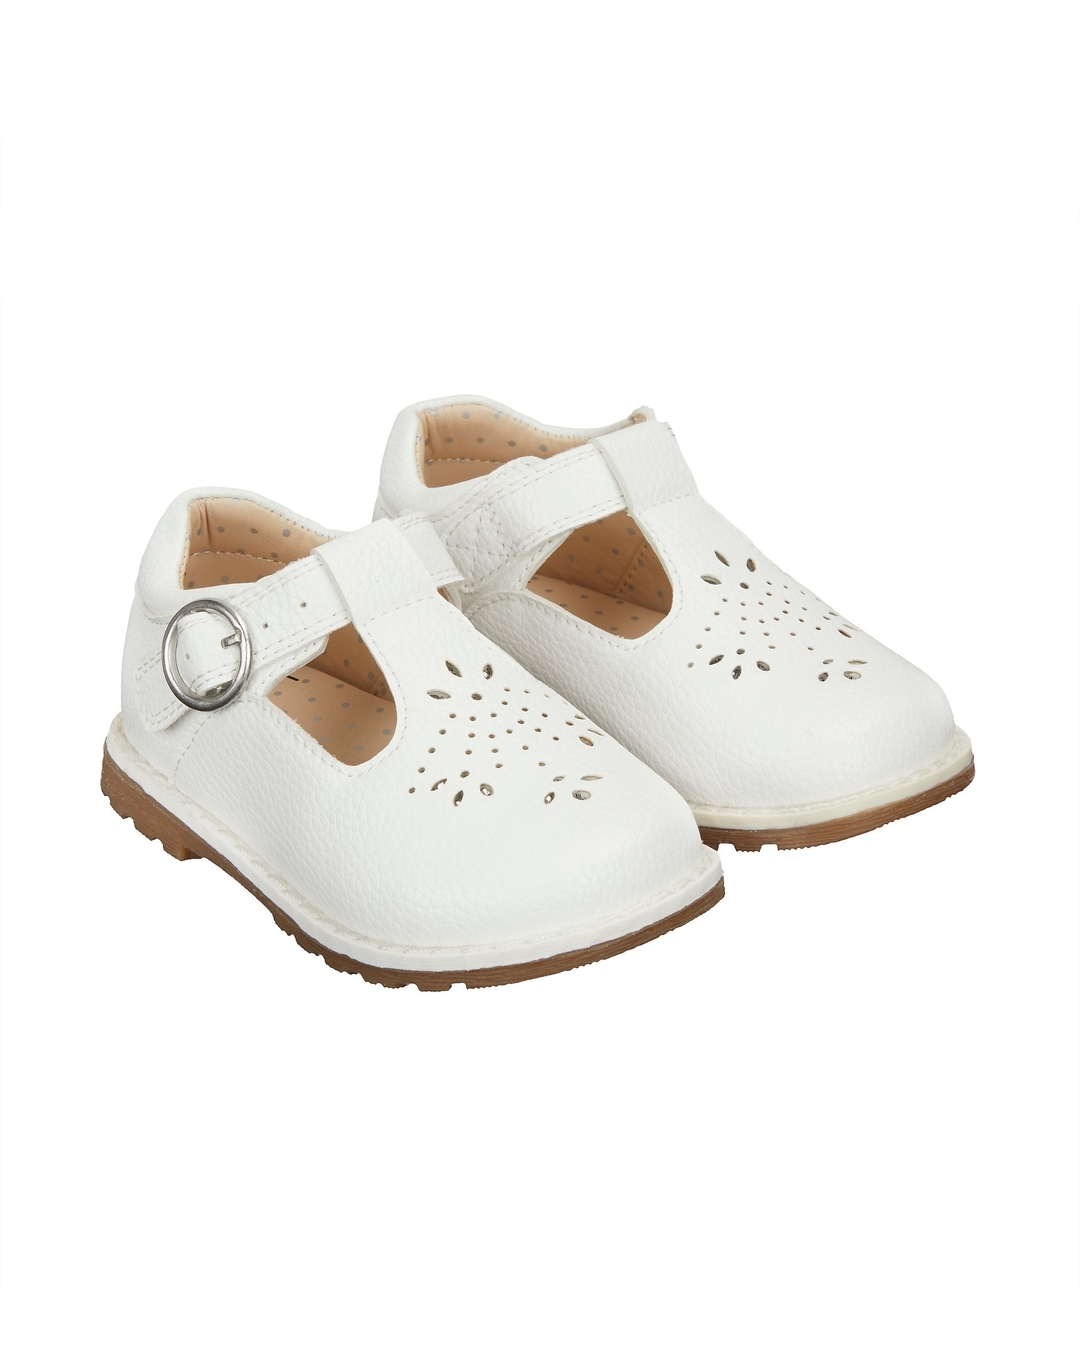 Buy Girls Cut -Out First Walker Shoes - White Online at Best Price ...